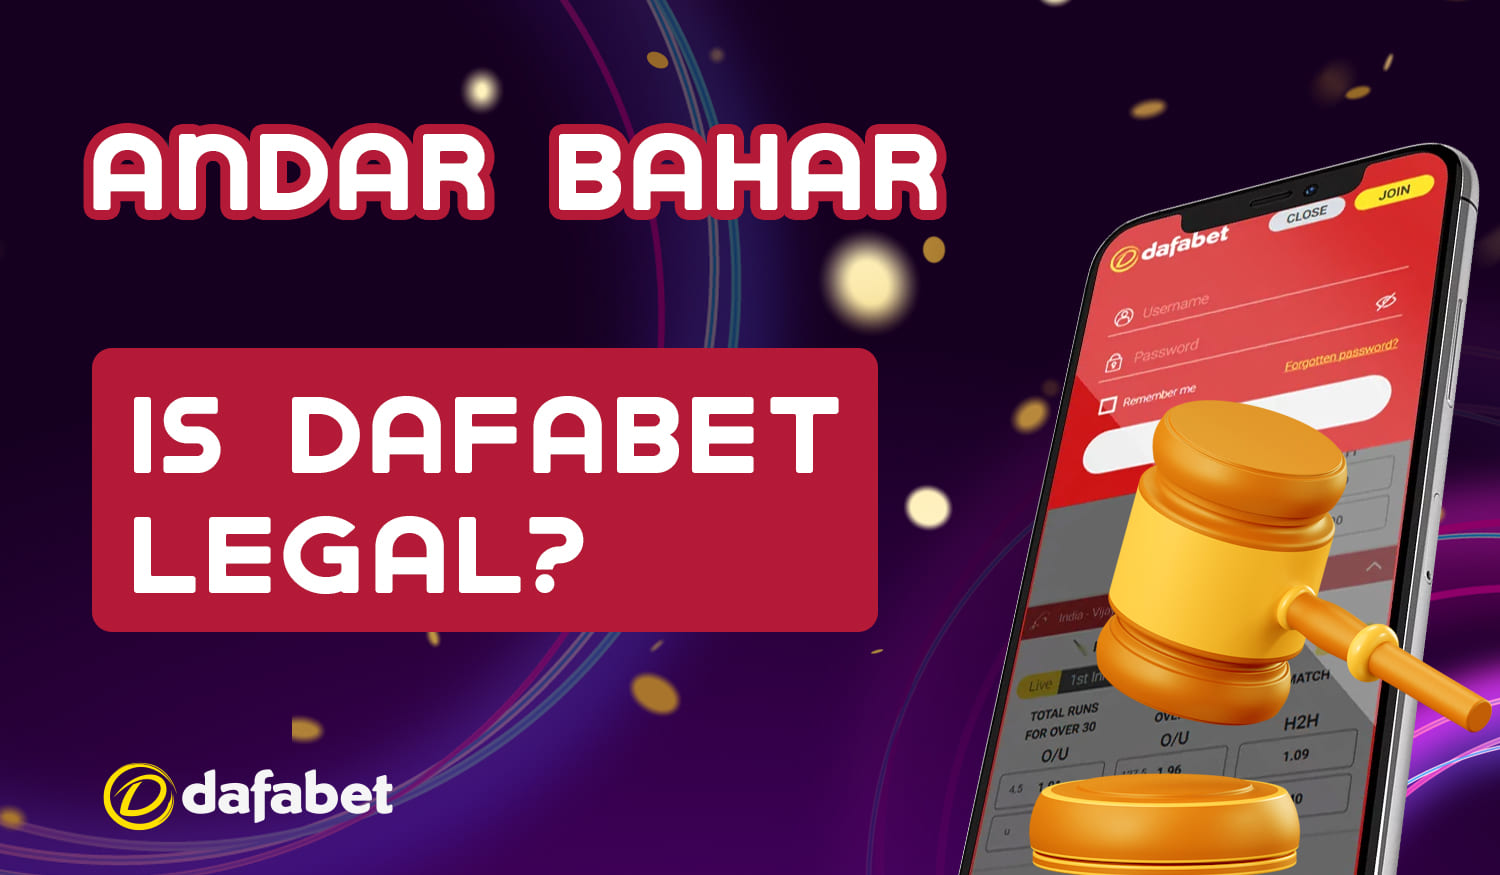 Is it legal for Andar Bahar fans to play at Dafabet 